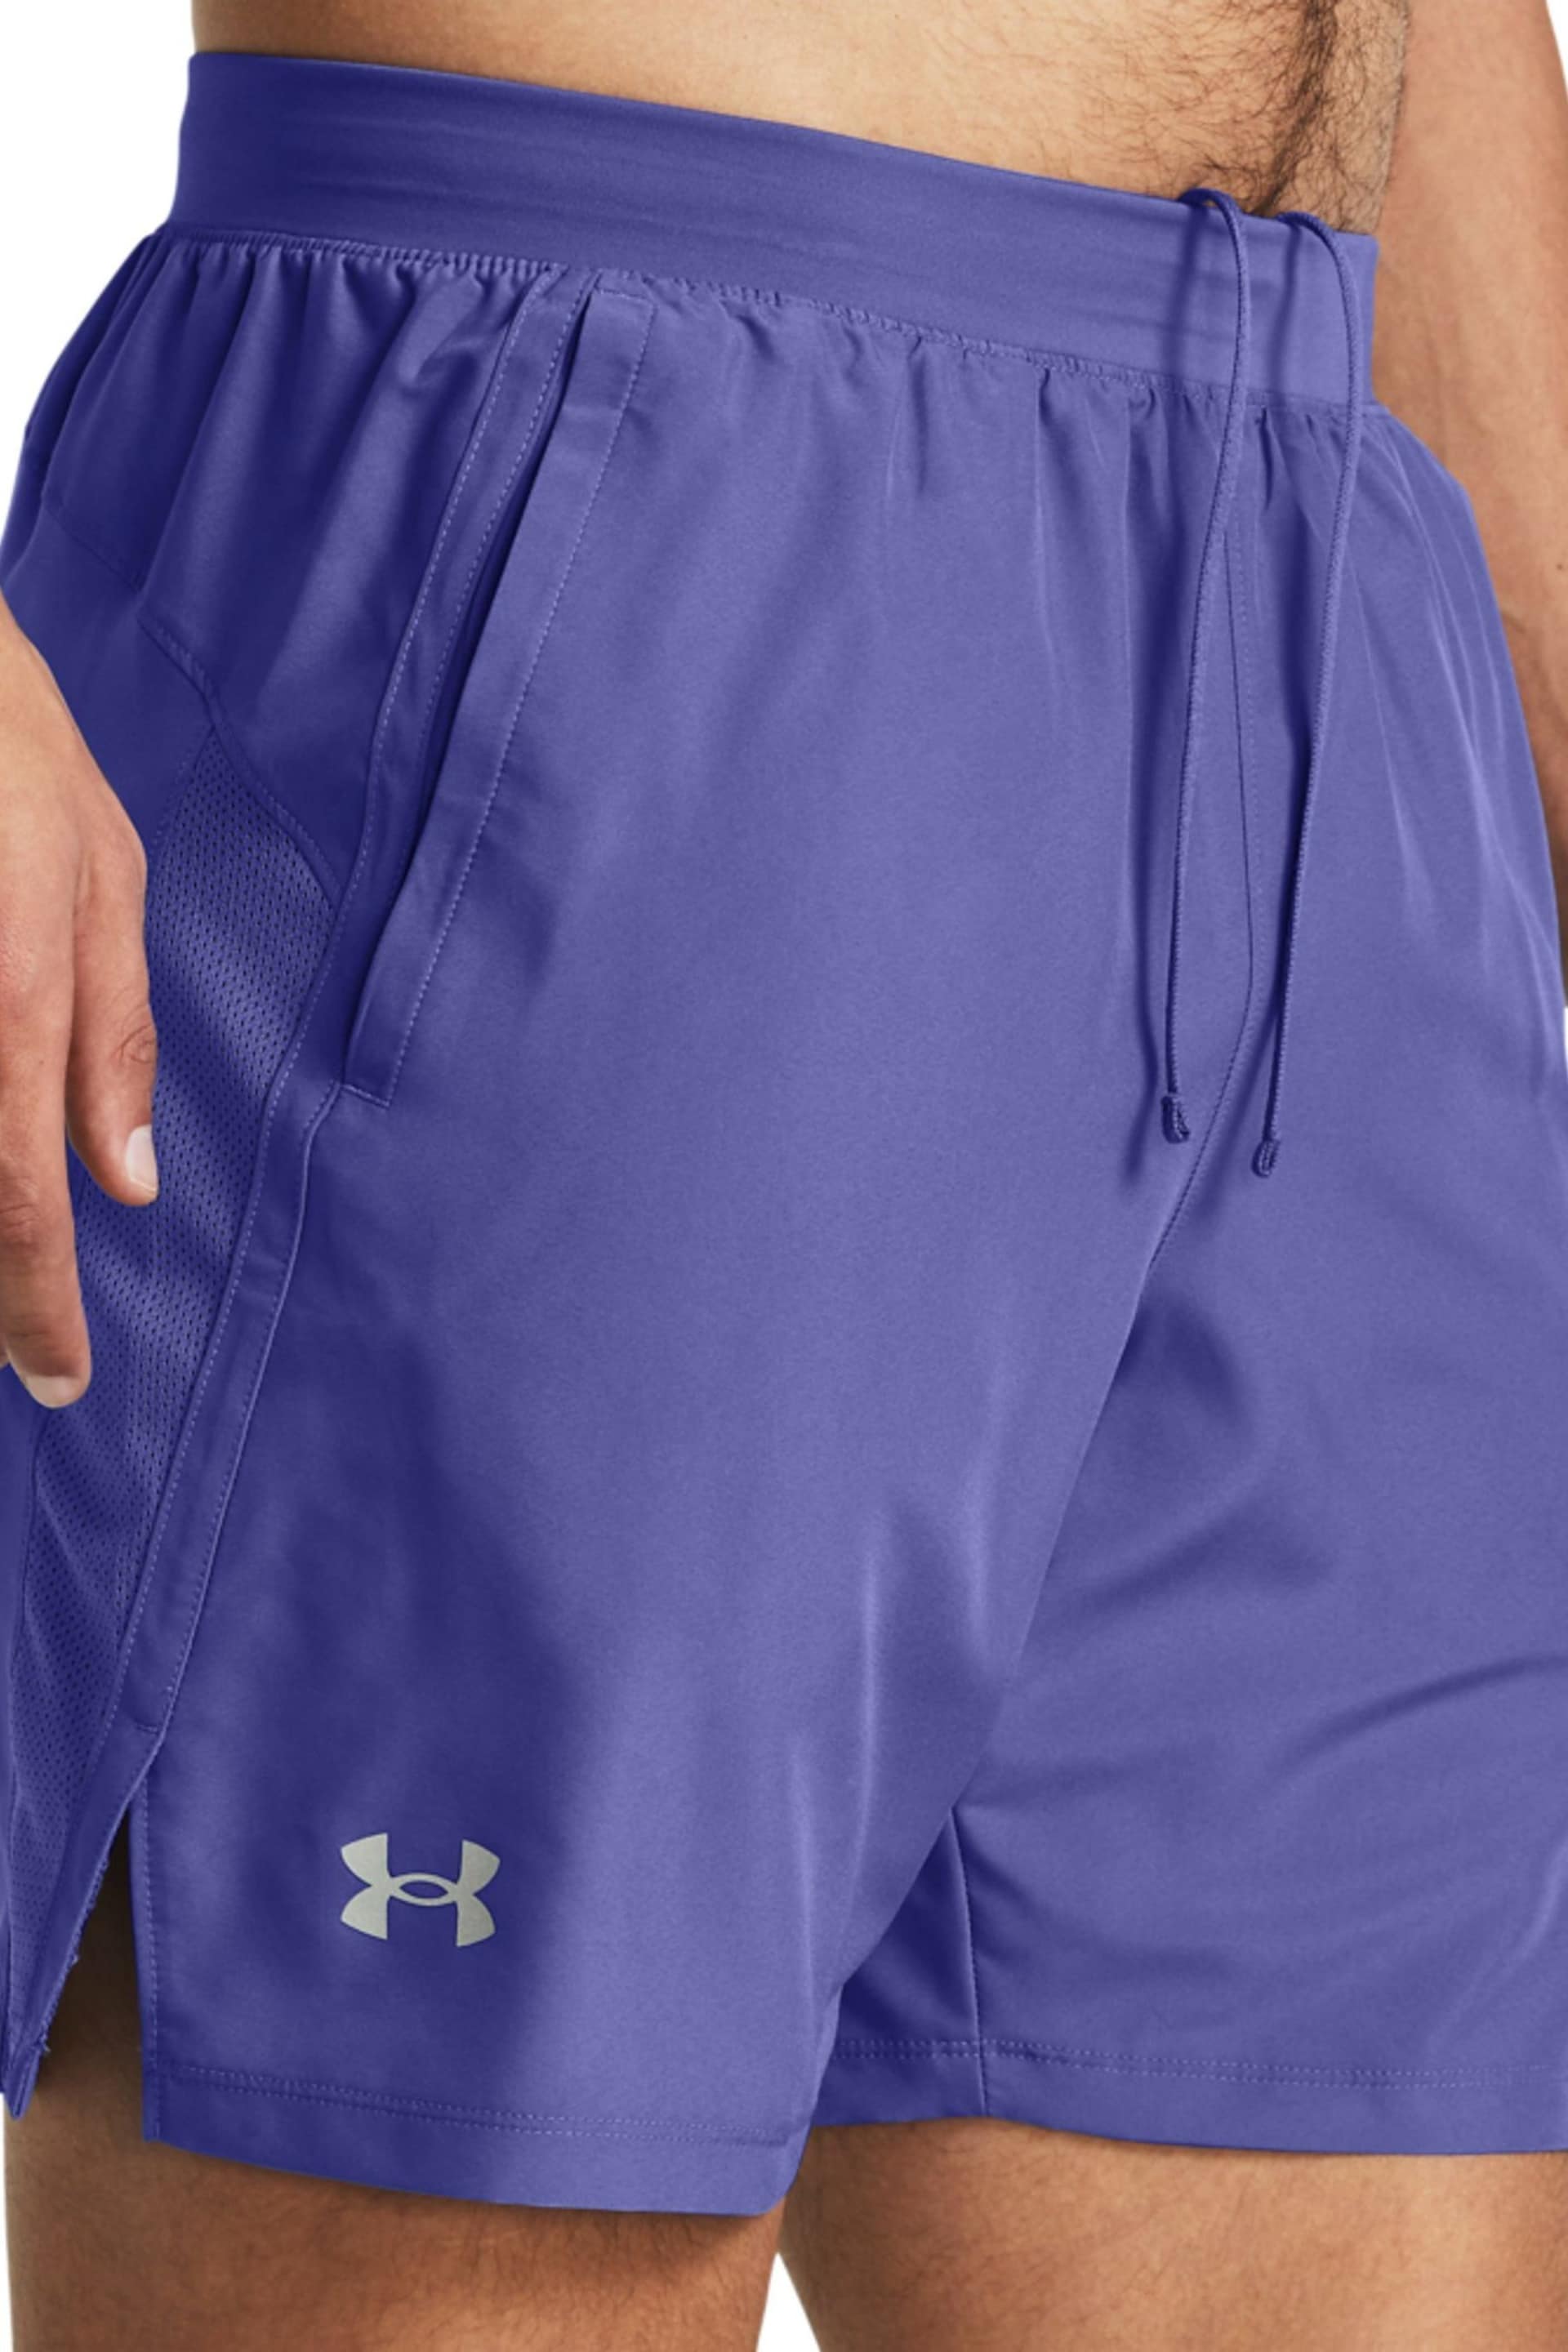 Under Armour Blue Launch 7" Shorts - Image 4 of 7